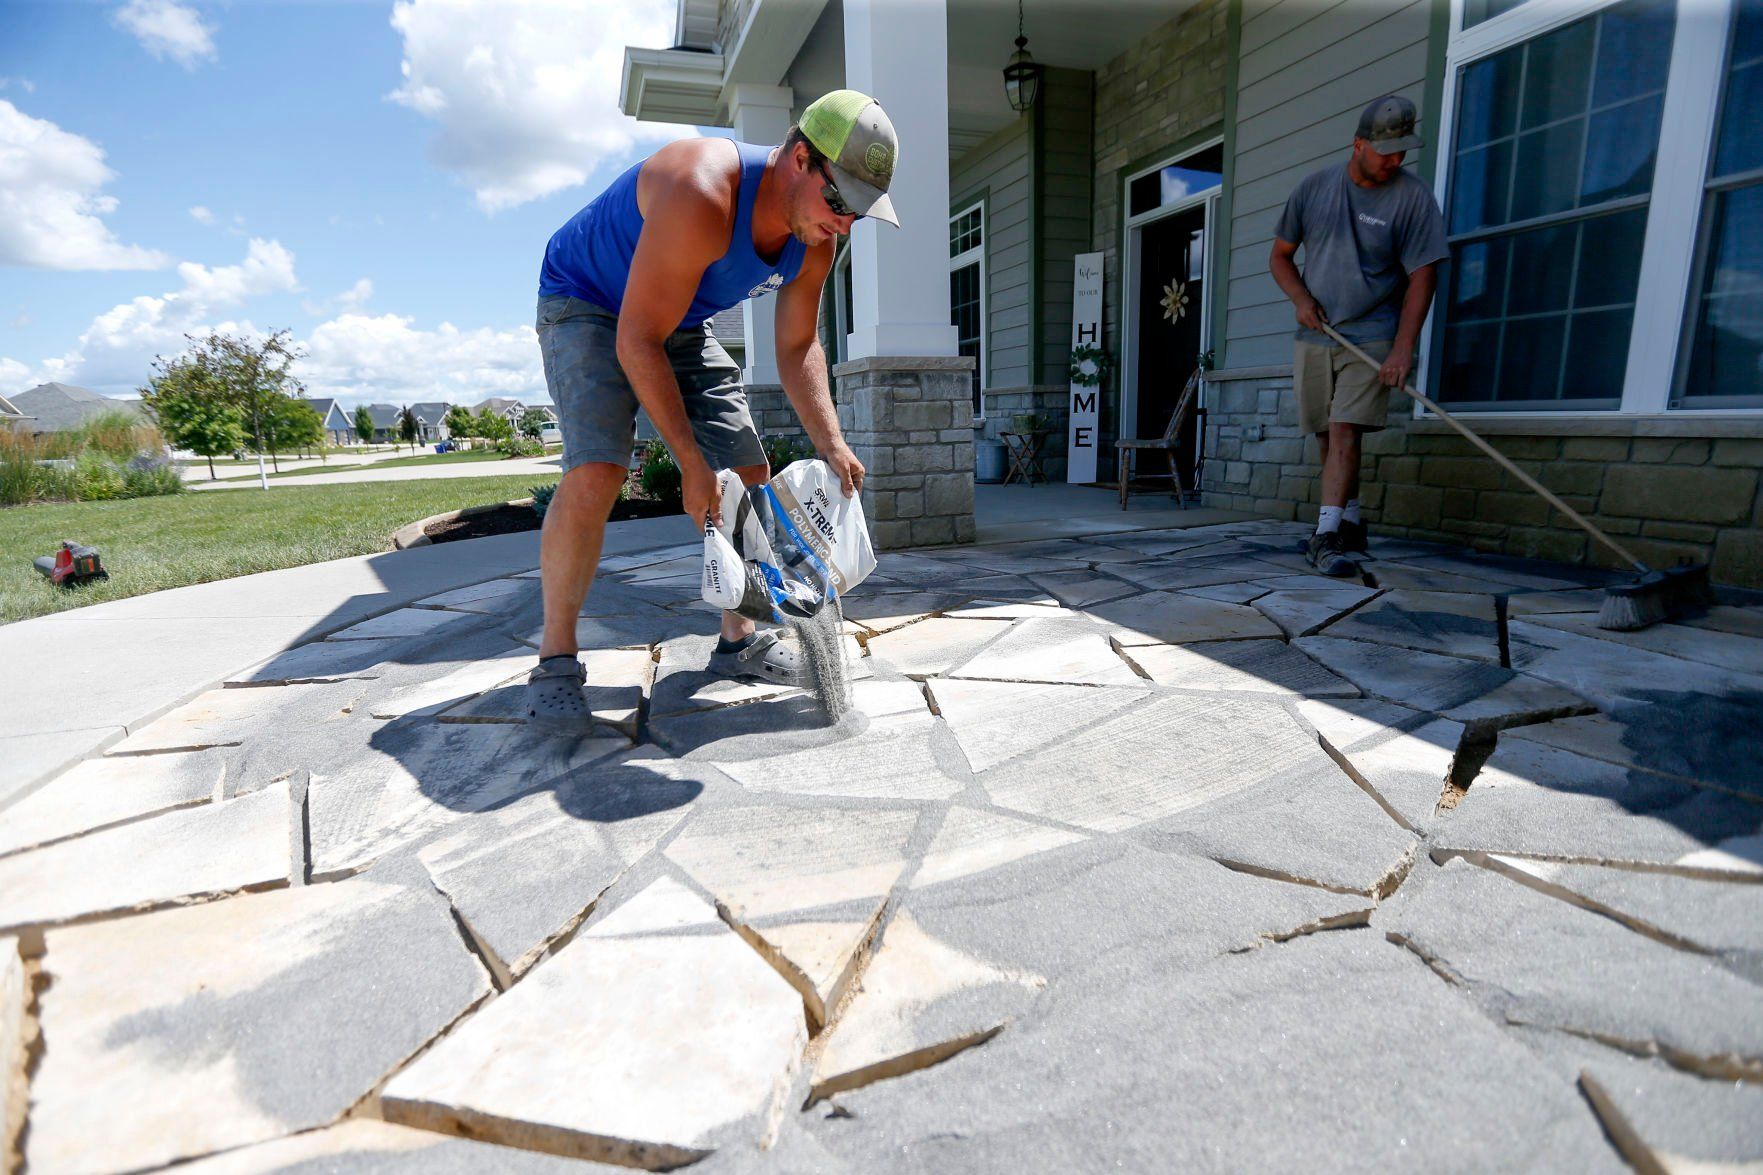 Jake Bohr owner of Cornerstone Nursery in Dubuque works on a landscaping project in Dubuque Friday, July 29, 2022. Bohr opened his business earlier this year.    PHOTO CREDIT: Dave Kettering